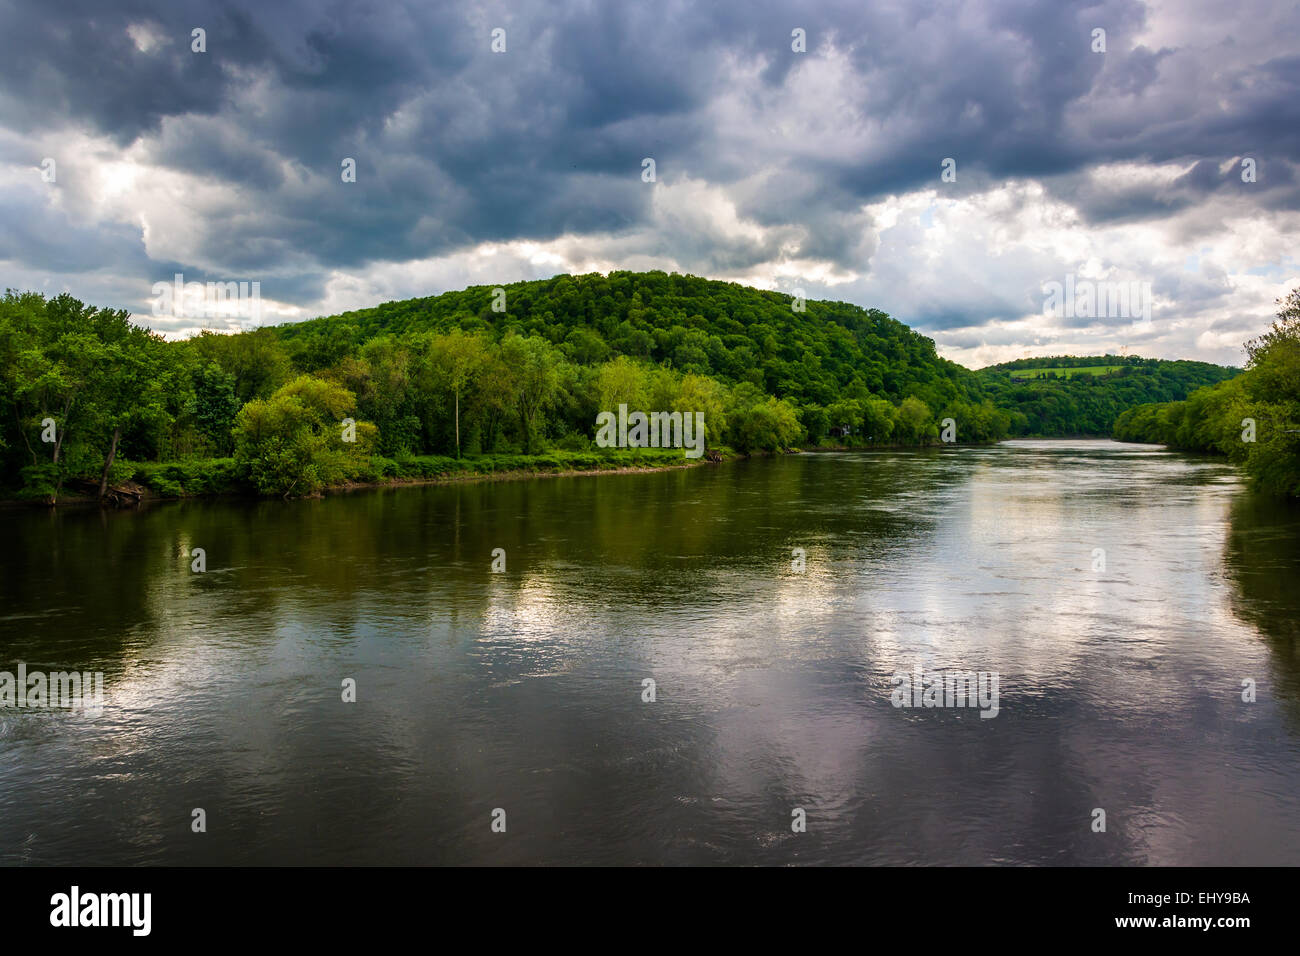 The Delaware River seen from a bridge in Belvidere, New Jersey. Stock Photo